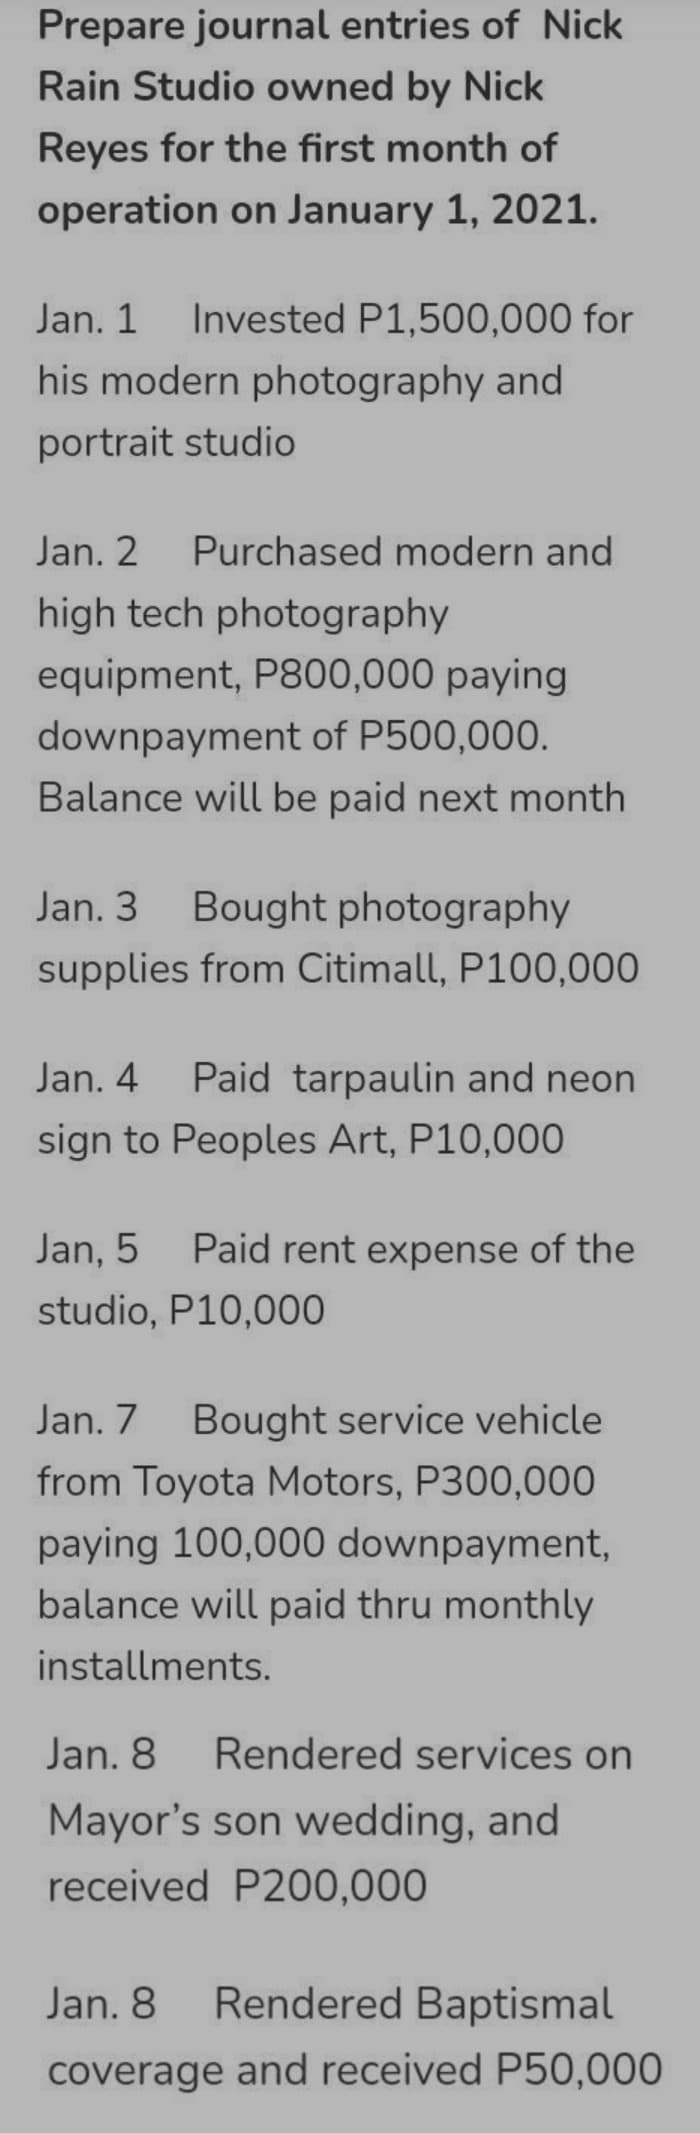 Prepare journal entries of Nick
Rain Studio owned by Nick
Reyes for the first month of
operation on January 1, 2021.
Jan. 1
Invested P1,500,000 for
his modern photography and
portrait studio
Jan. 2
Purchased modern and
high tech photography
equipment, P800,000 paying
downpayment of P500,000.
Balance will be paid next month
Jan. 3 Bought photography
supplies from Citimall, P100,000
Jan. 4
Paid tarpaulin and neon
sign to Peoples Art, P10,000
Jan, 5
Paid rent expense of the
studio, P10,000
Jan. 7
Bought service vehicle
from Toyota Motors, P300,000
paying 100,000 downpayment,
balance will paid thru monthly
installments.
Jan. 8
Rendered services on
Mayor's son wedding, and
received P200,000
Jan. 8
Rendered Baptismal
coverage and received P50,000
